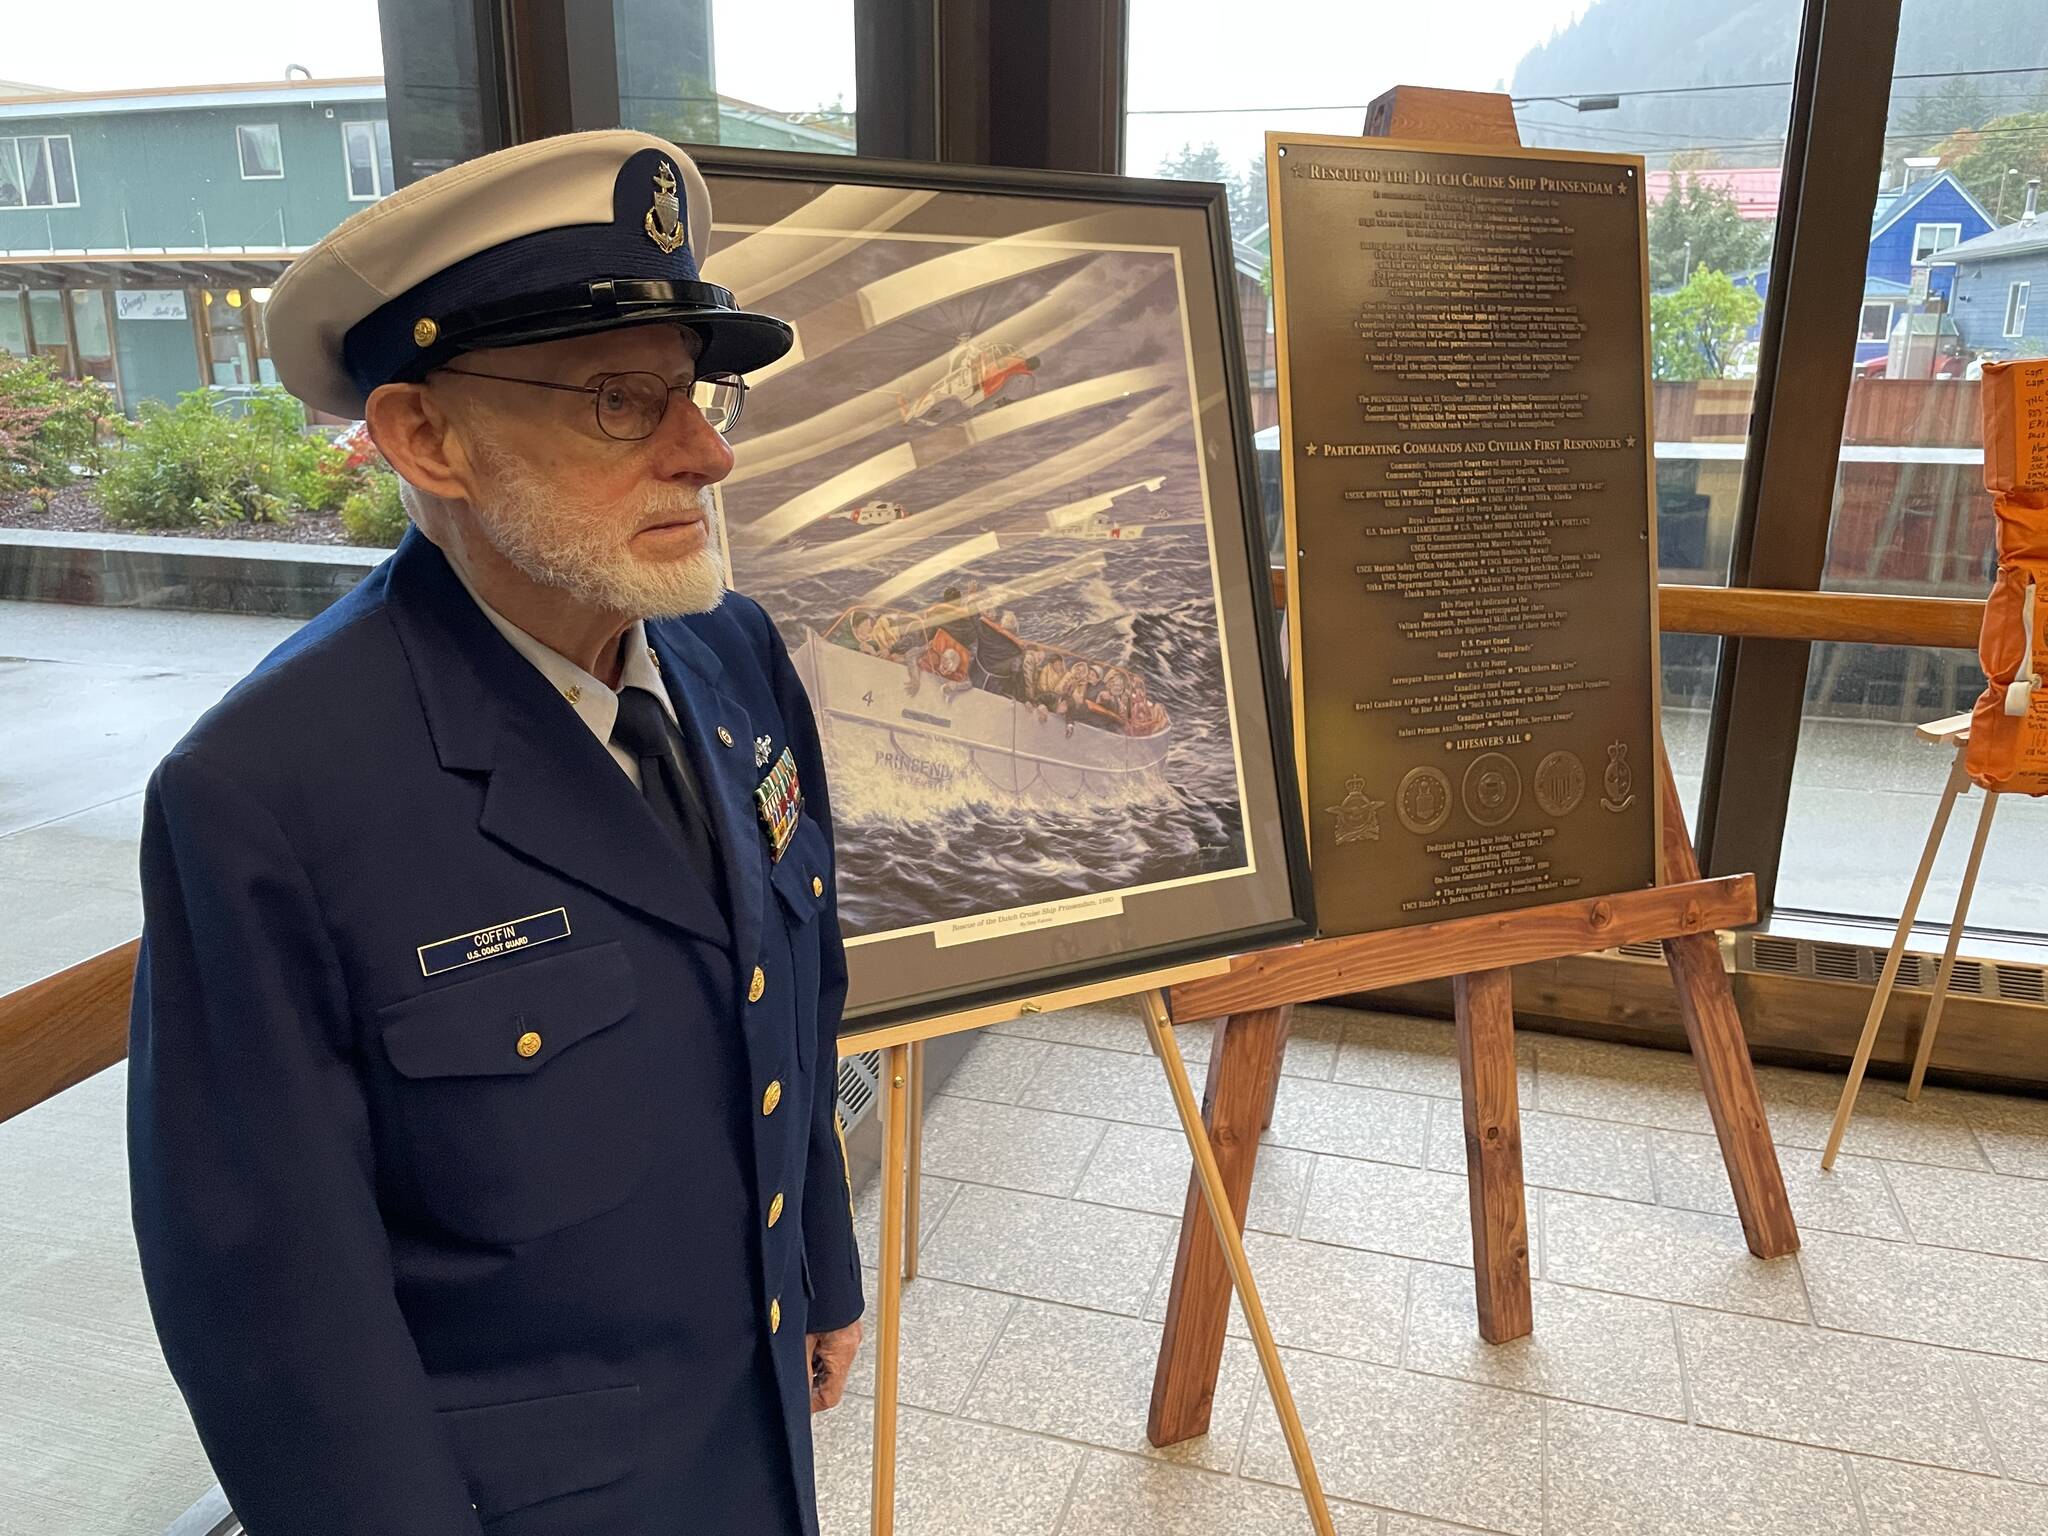 Senior Chief Petty Officer Eugene Coffin III, who helped coordinate the response to the Prinsendam fire from the Coast Guard District 17 watch center, stands next to the plaque commemorating the rescue in the lobby of the Hurff A. Saunders Federal Building on Sept. 23, 2021. (Michael S. Lockett / Juneau Empire)